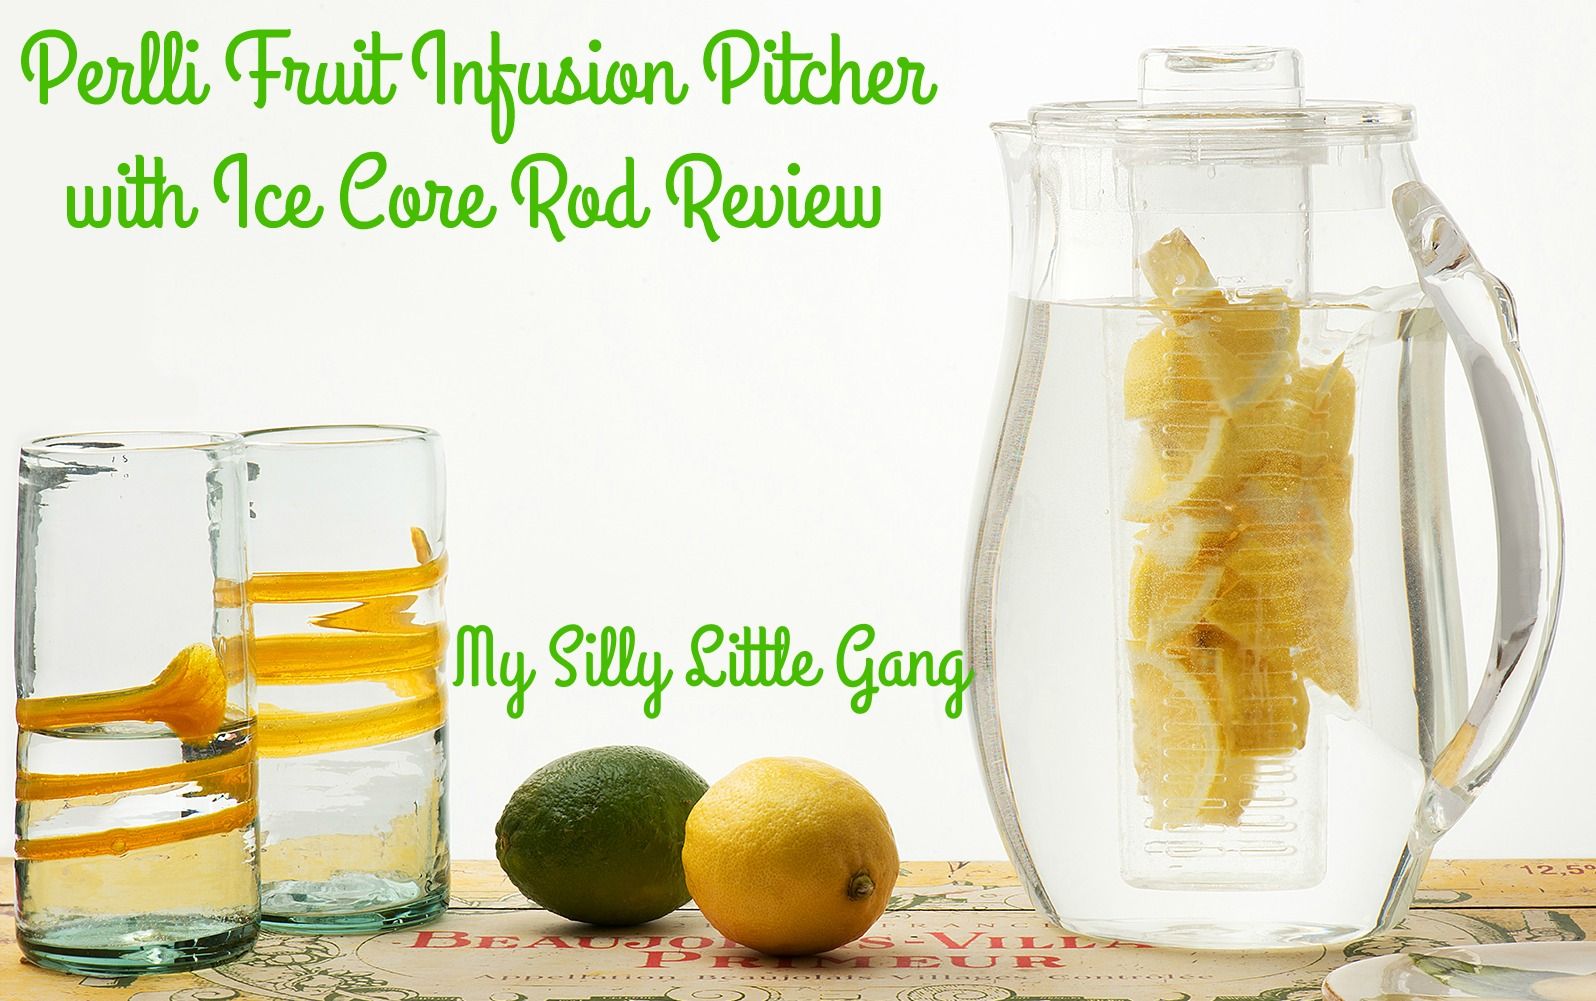 infusion-pitcher